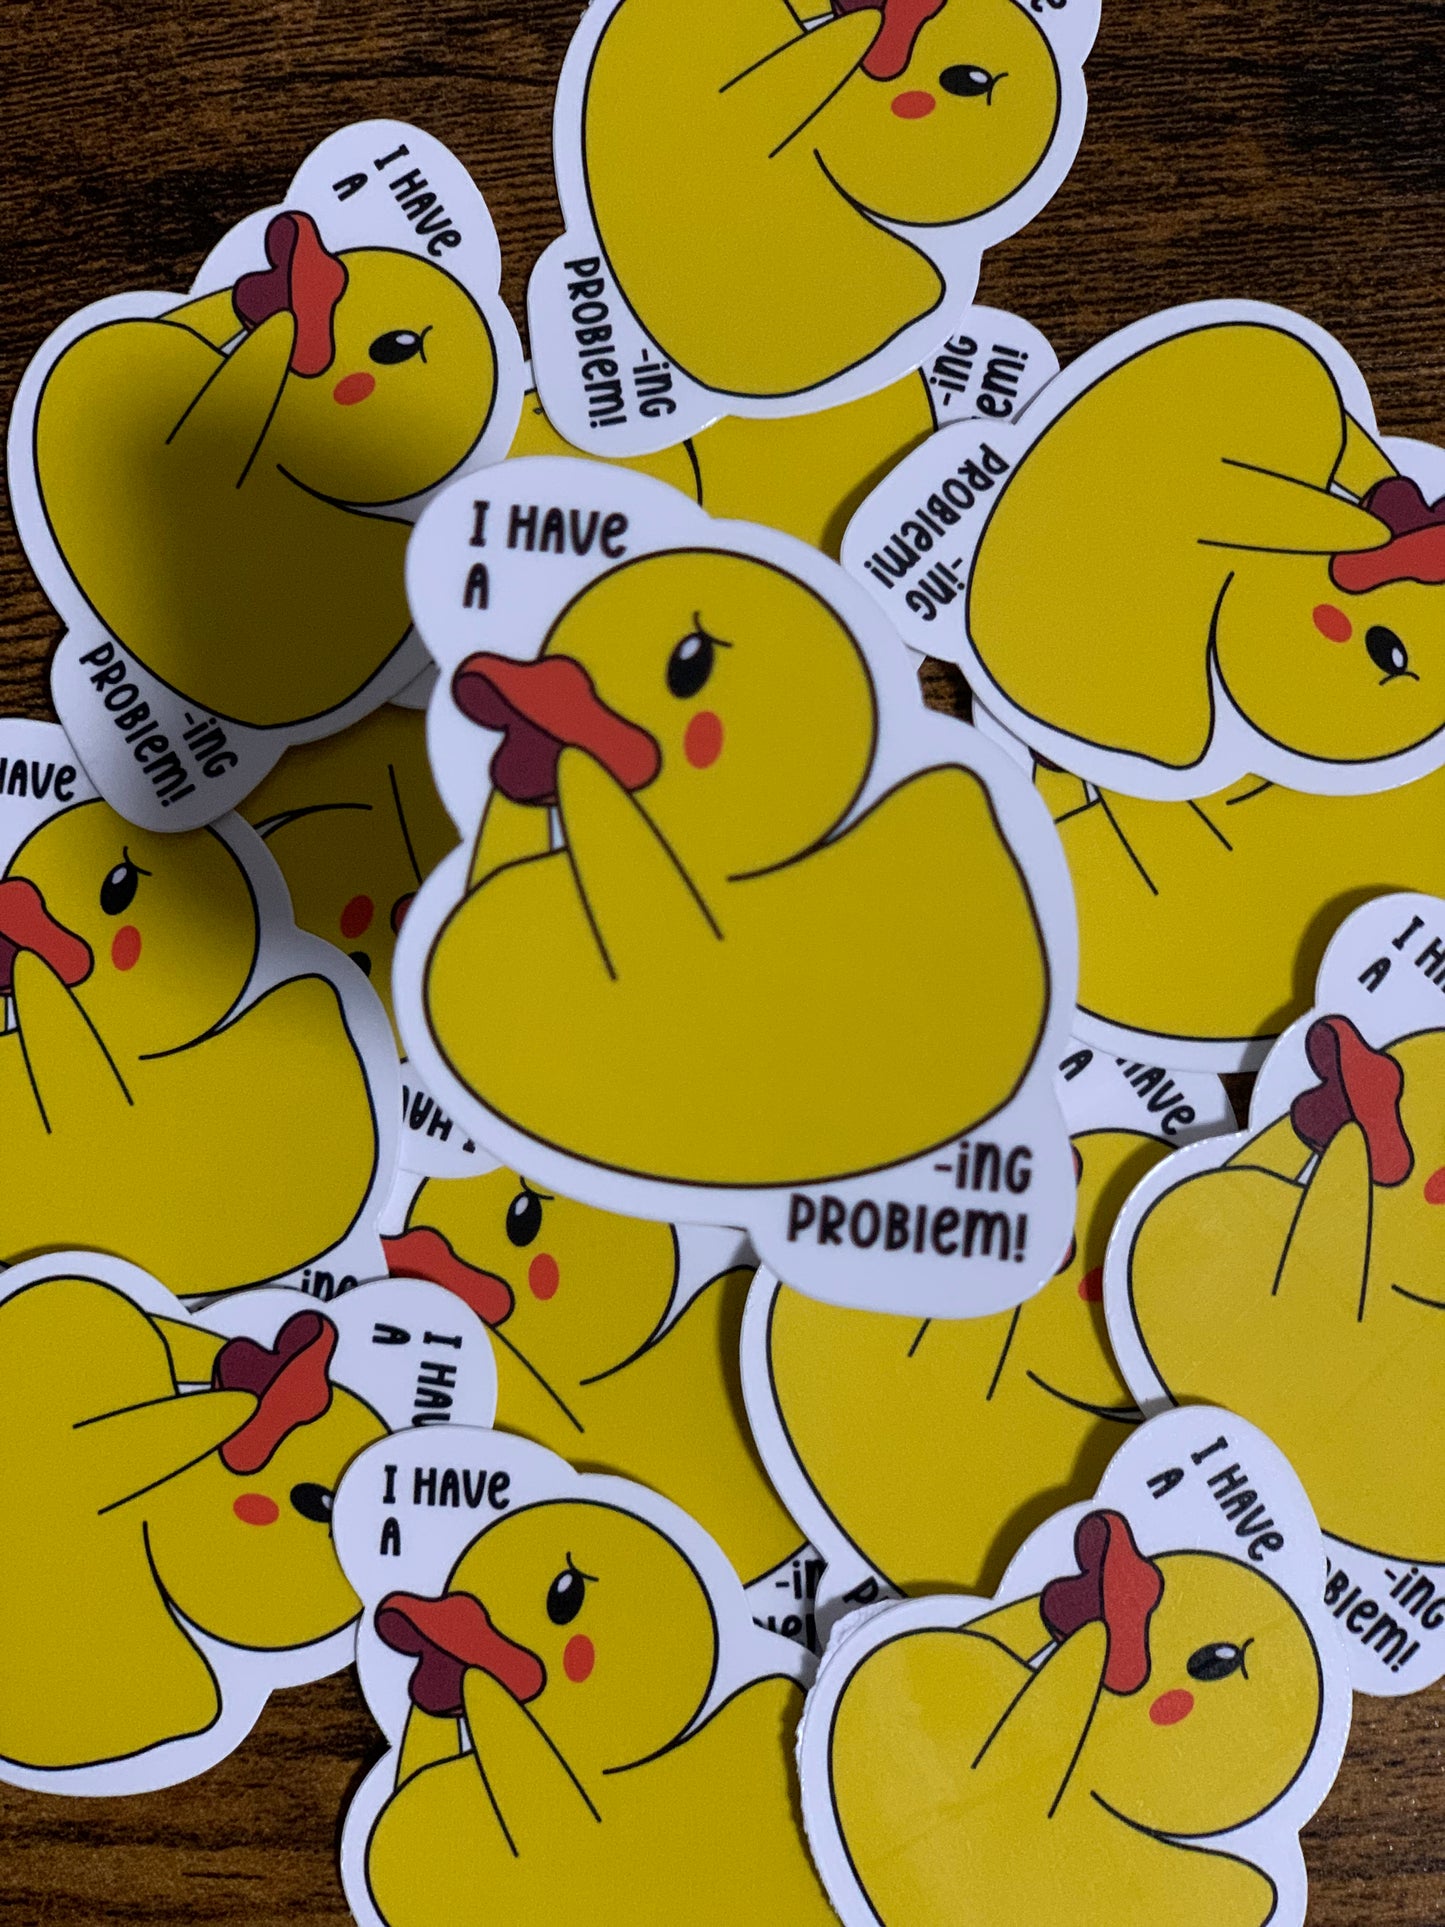 I have a DUCK-ing problem Sticker